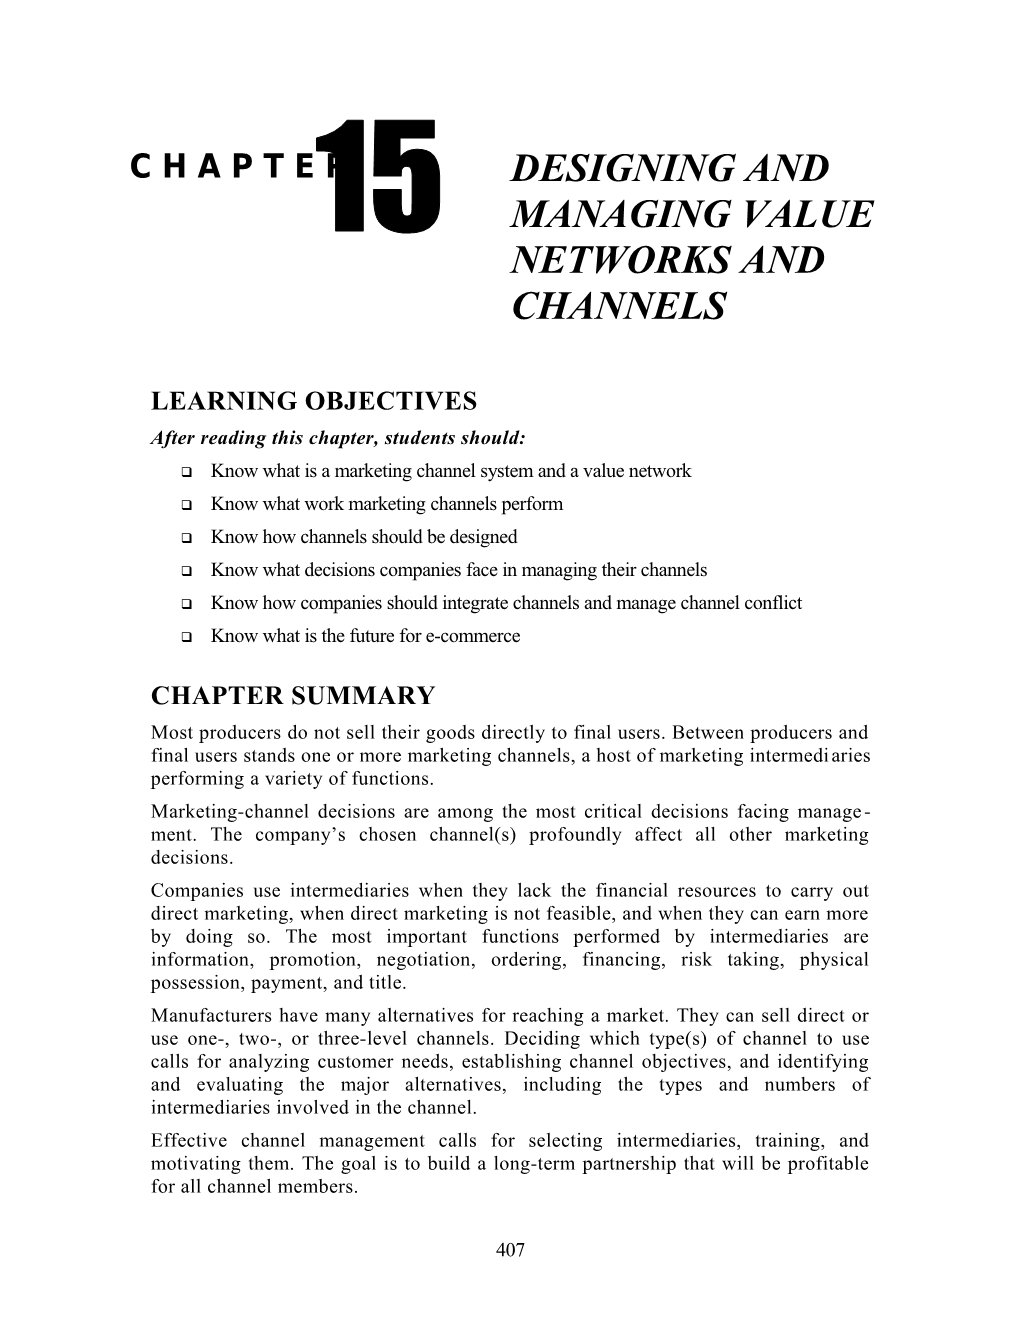 Chapter 15: Designing and Managing Value Networks and Channels